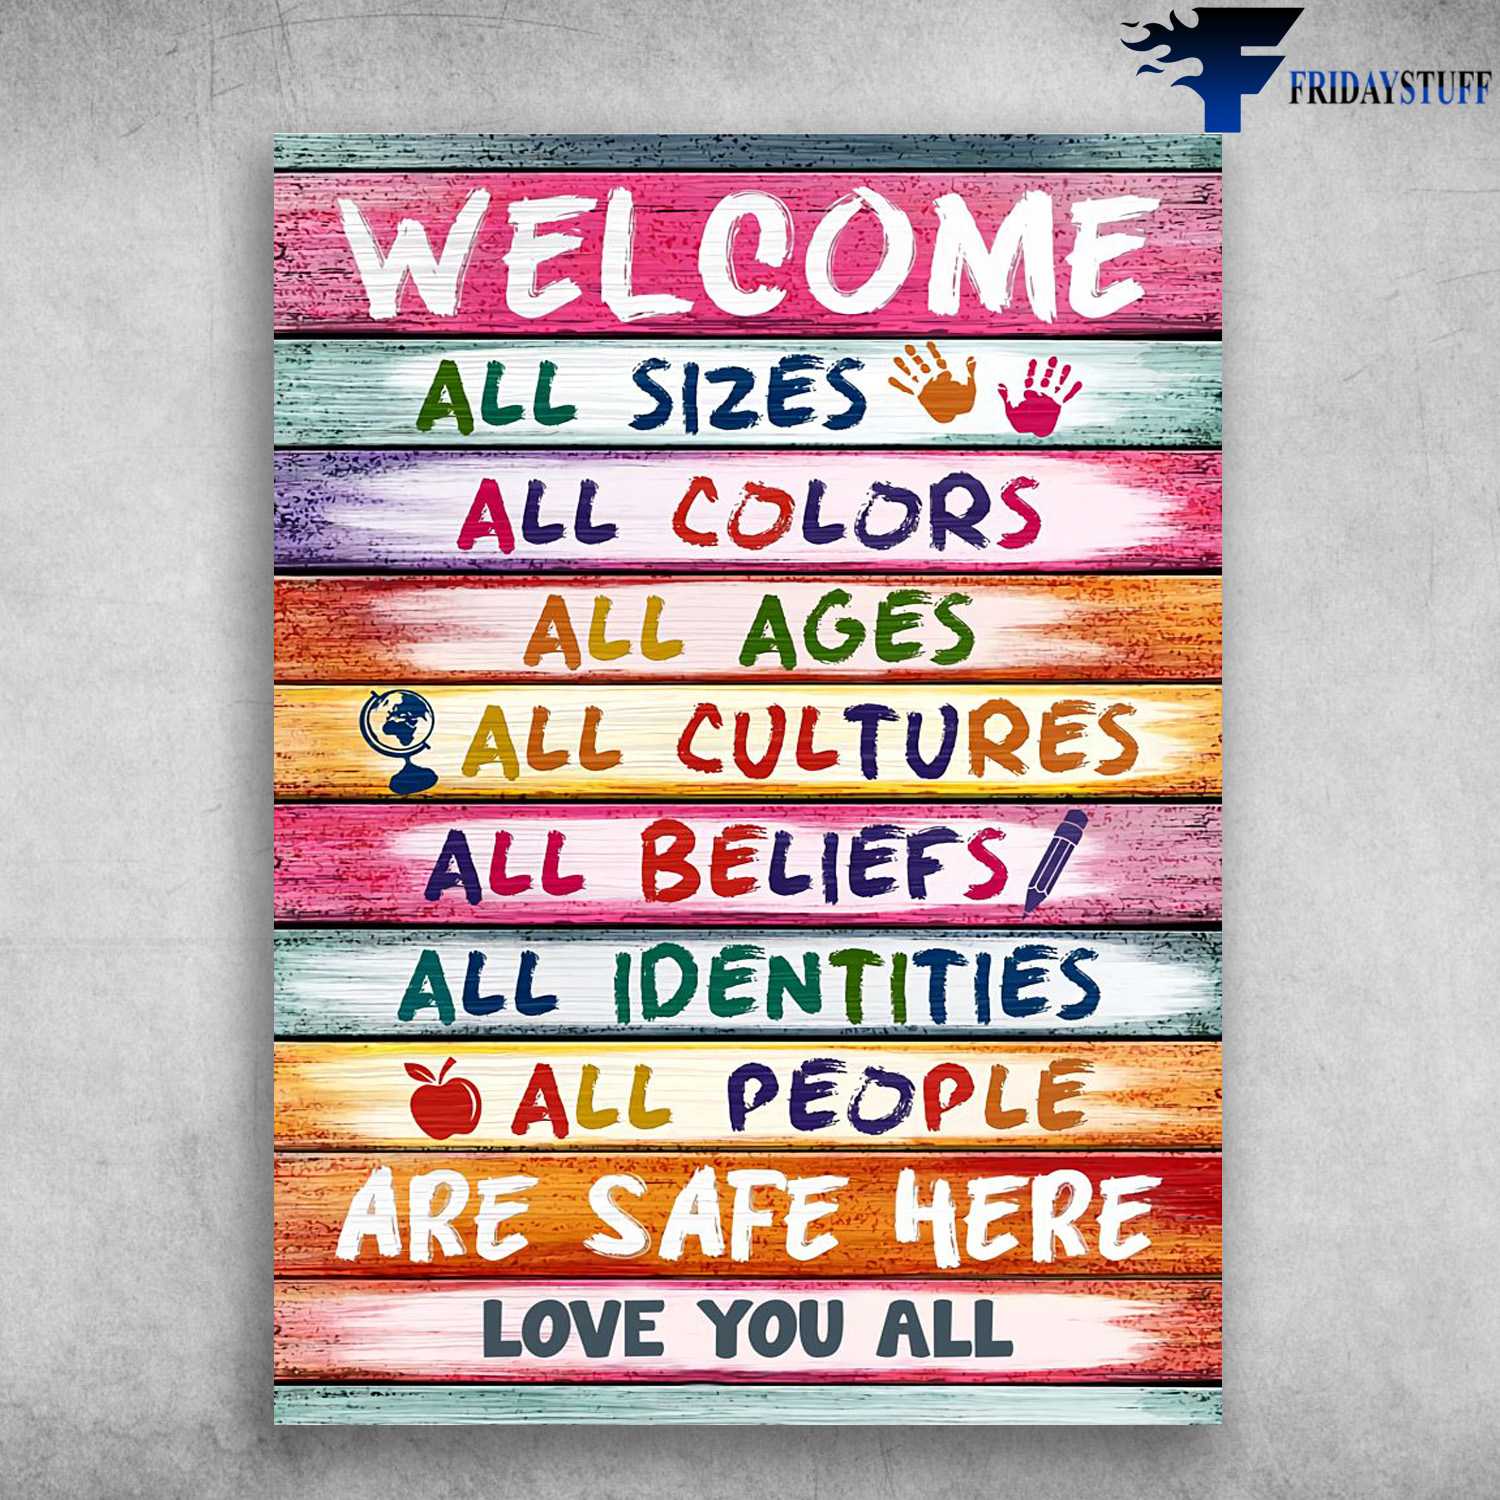 Welcome All Sizes, All Colors, All Ages, All Cultures, All Beliefs, All Identities, All People, Are Safe Here, Love You All